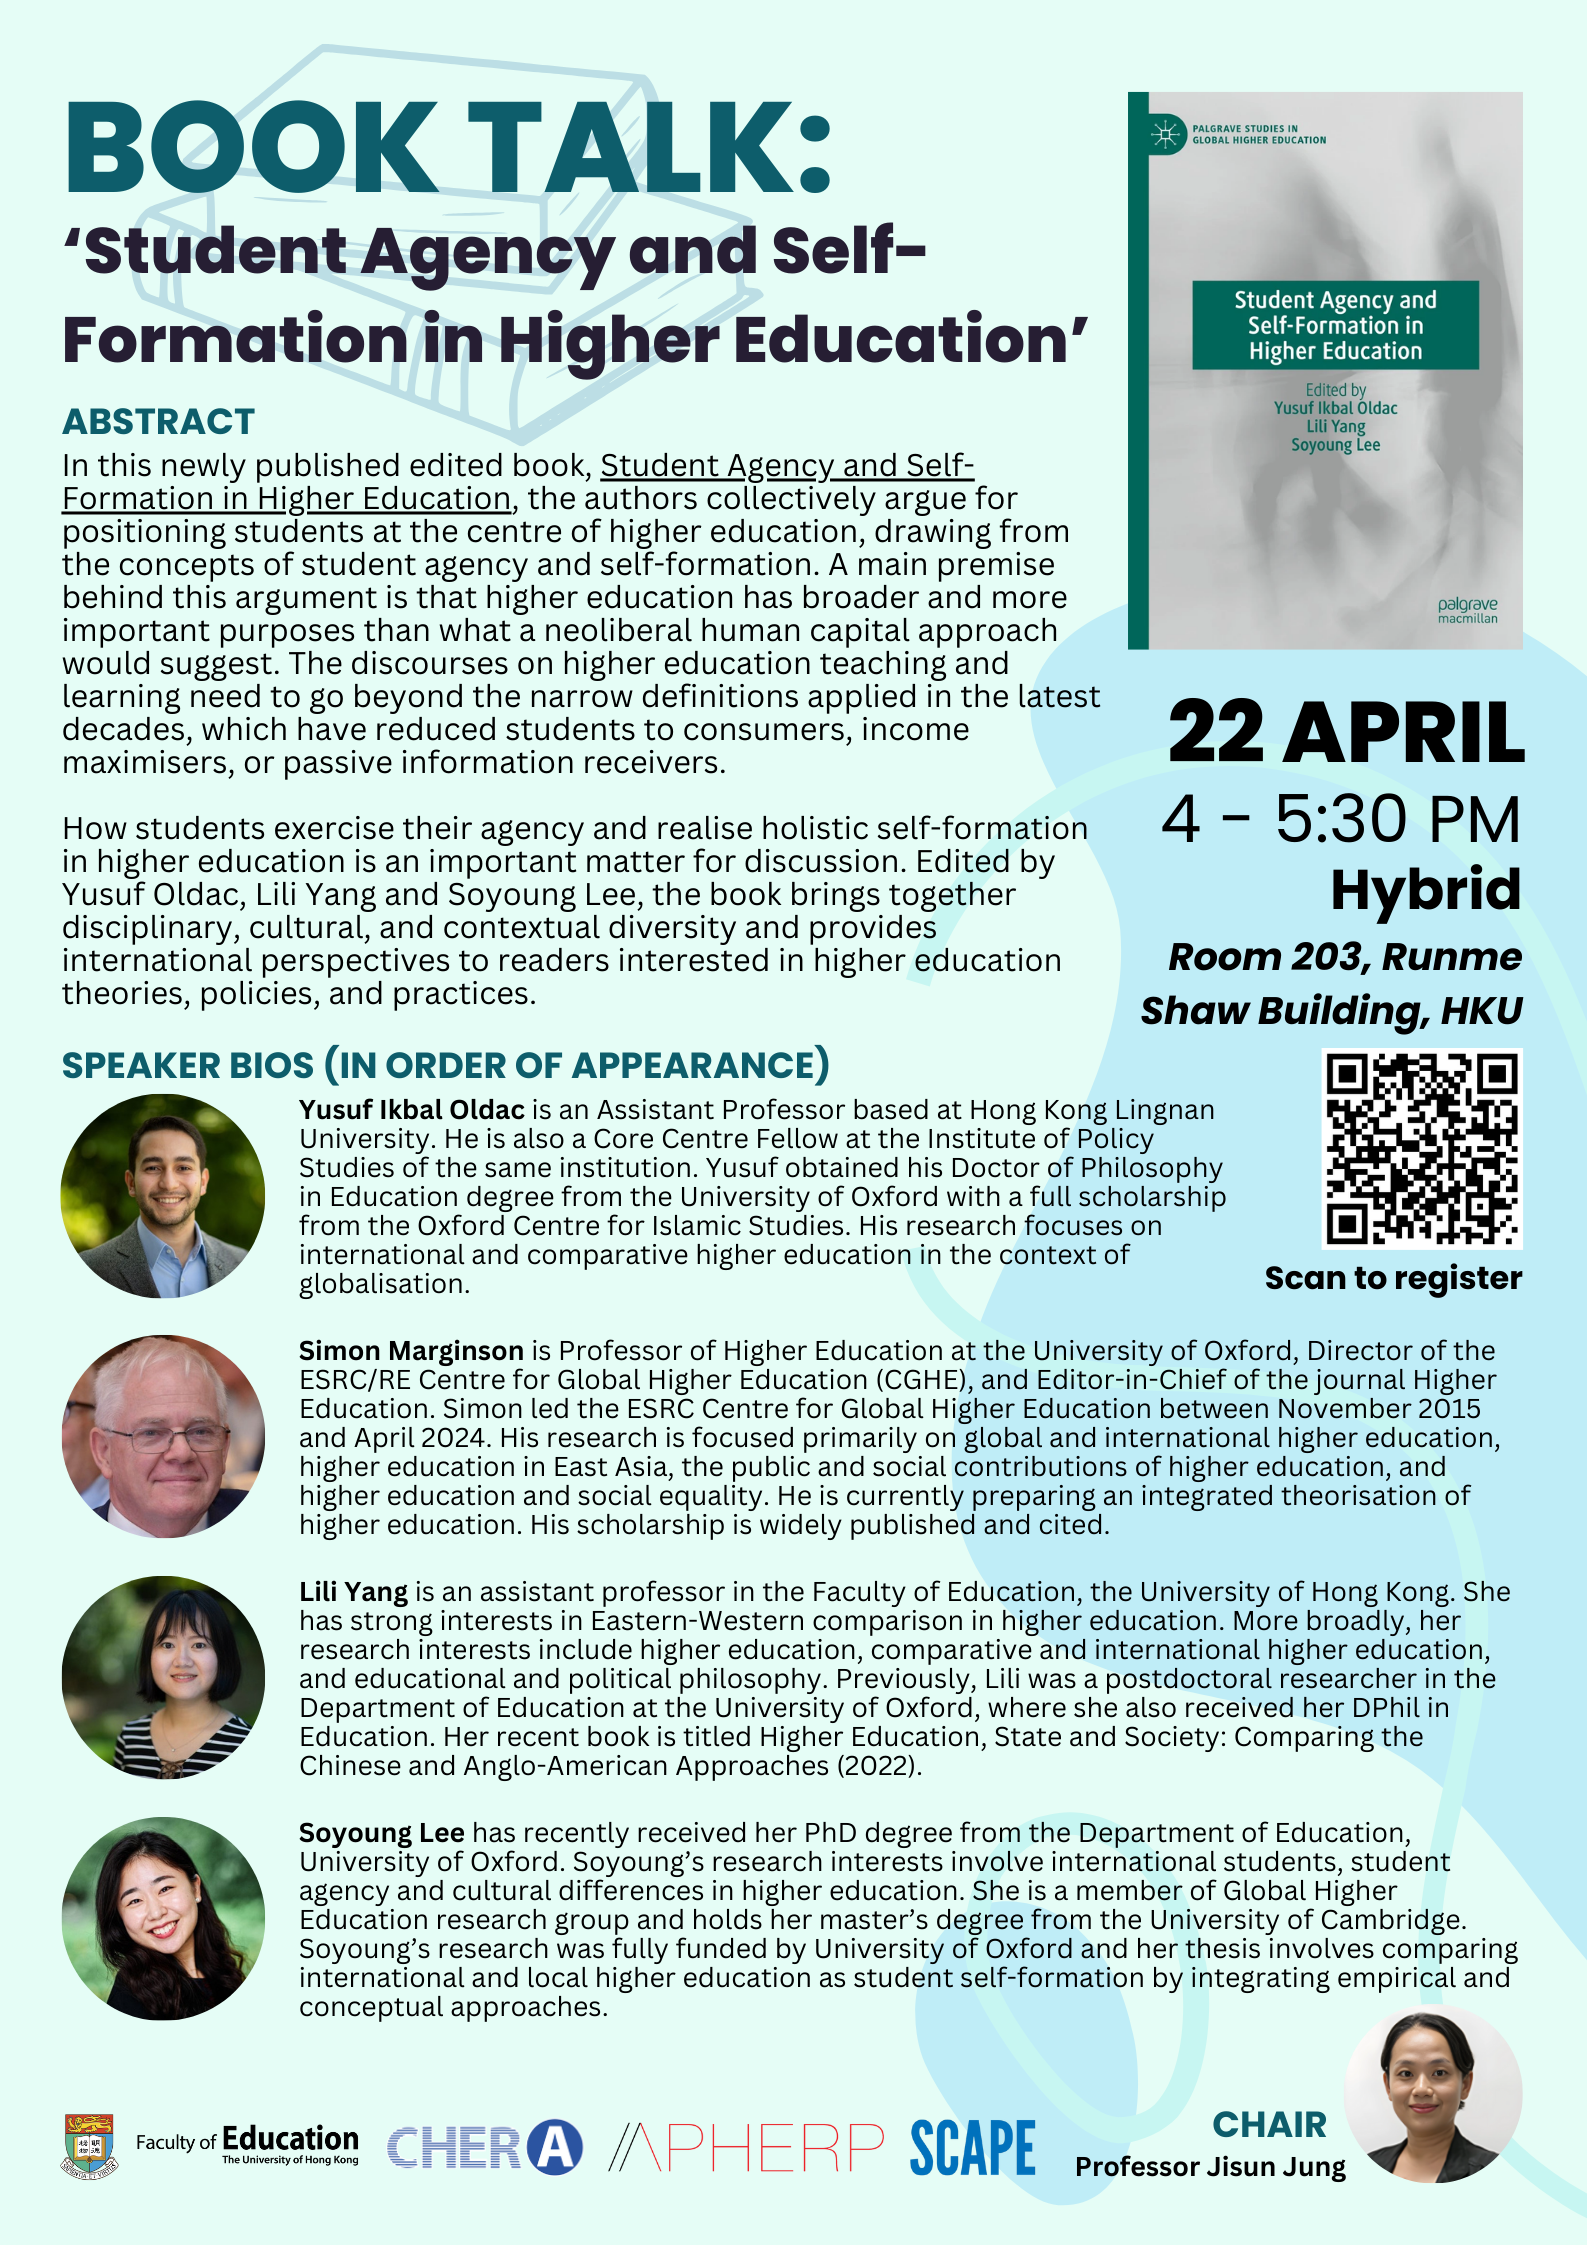 [Full Video Available] Book Talk: ‘Student Agency and Self-Formation in Higher Education’